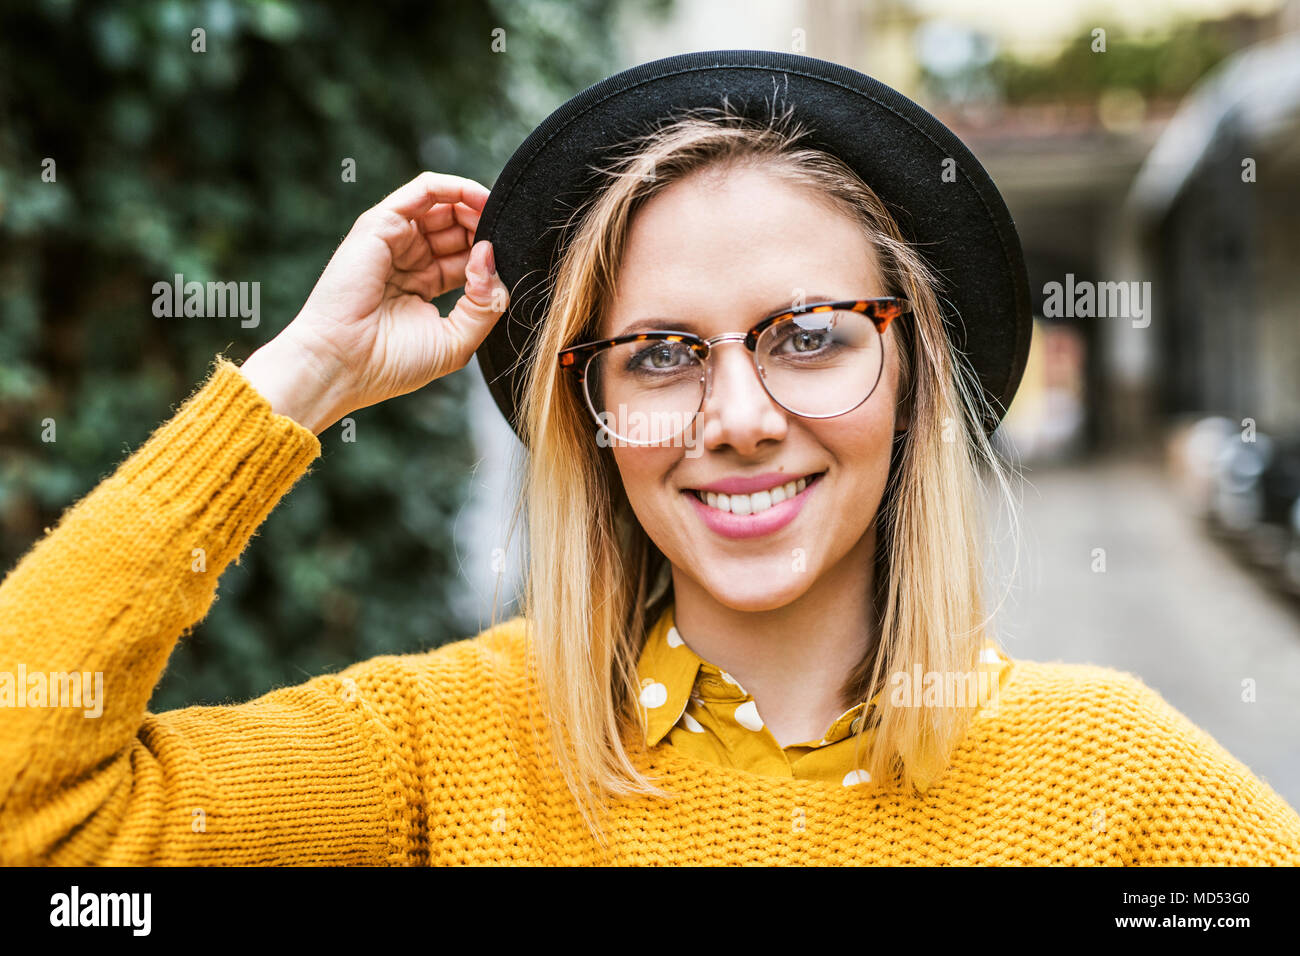 Young woman with black hat and glasses in sunny spring town. Stock Photo